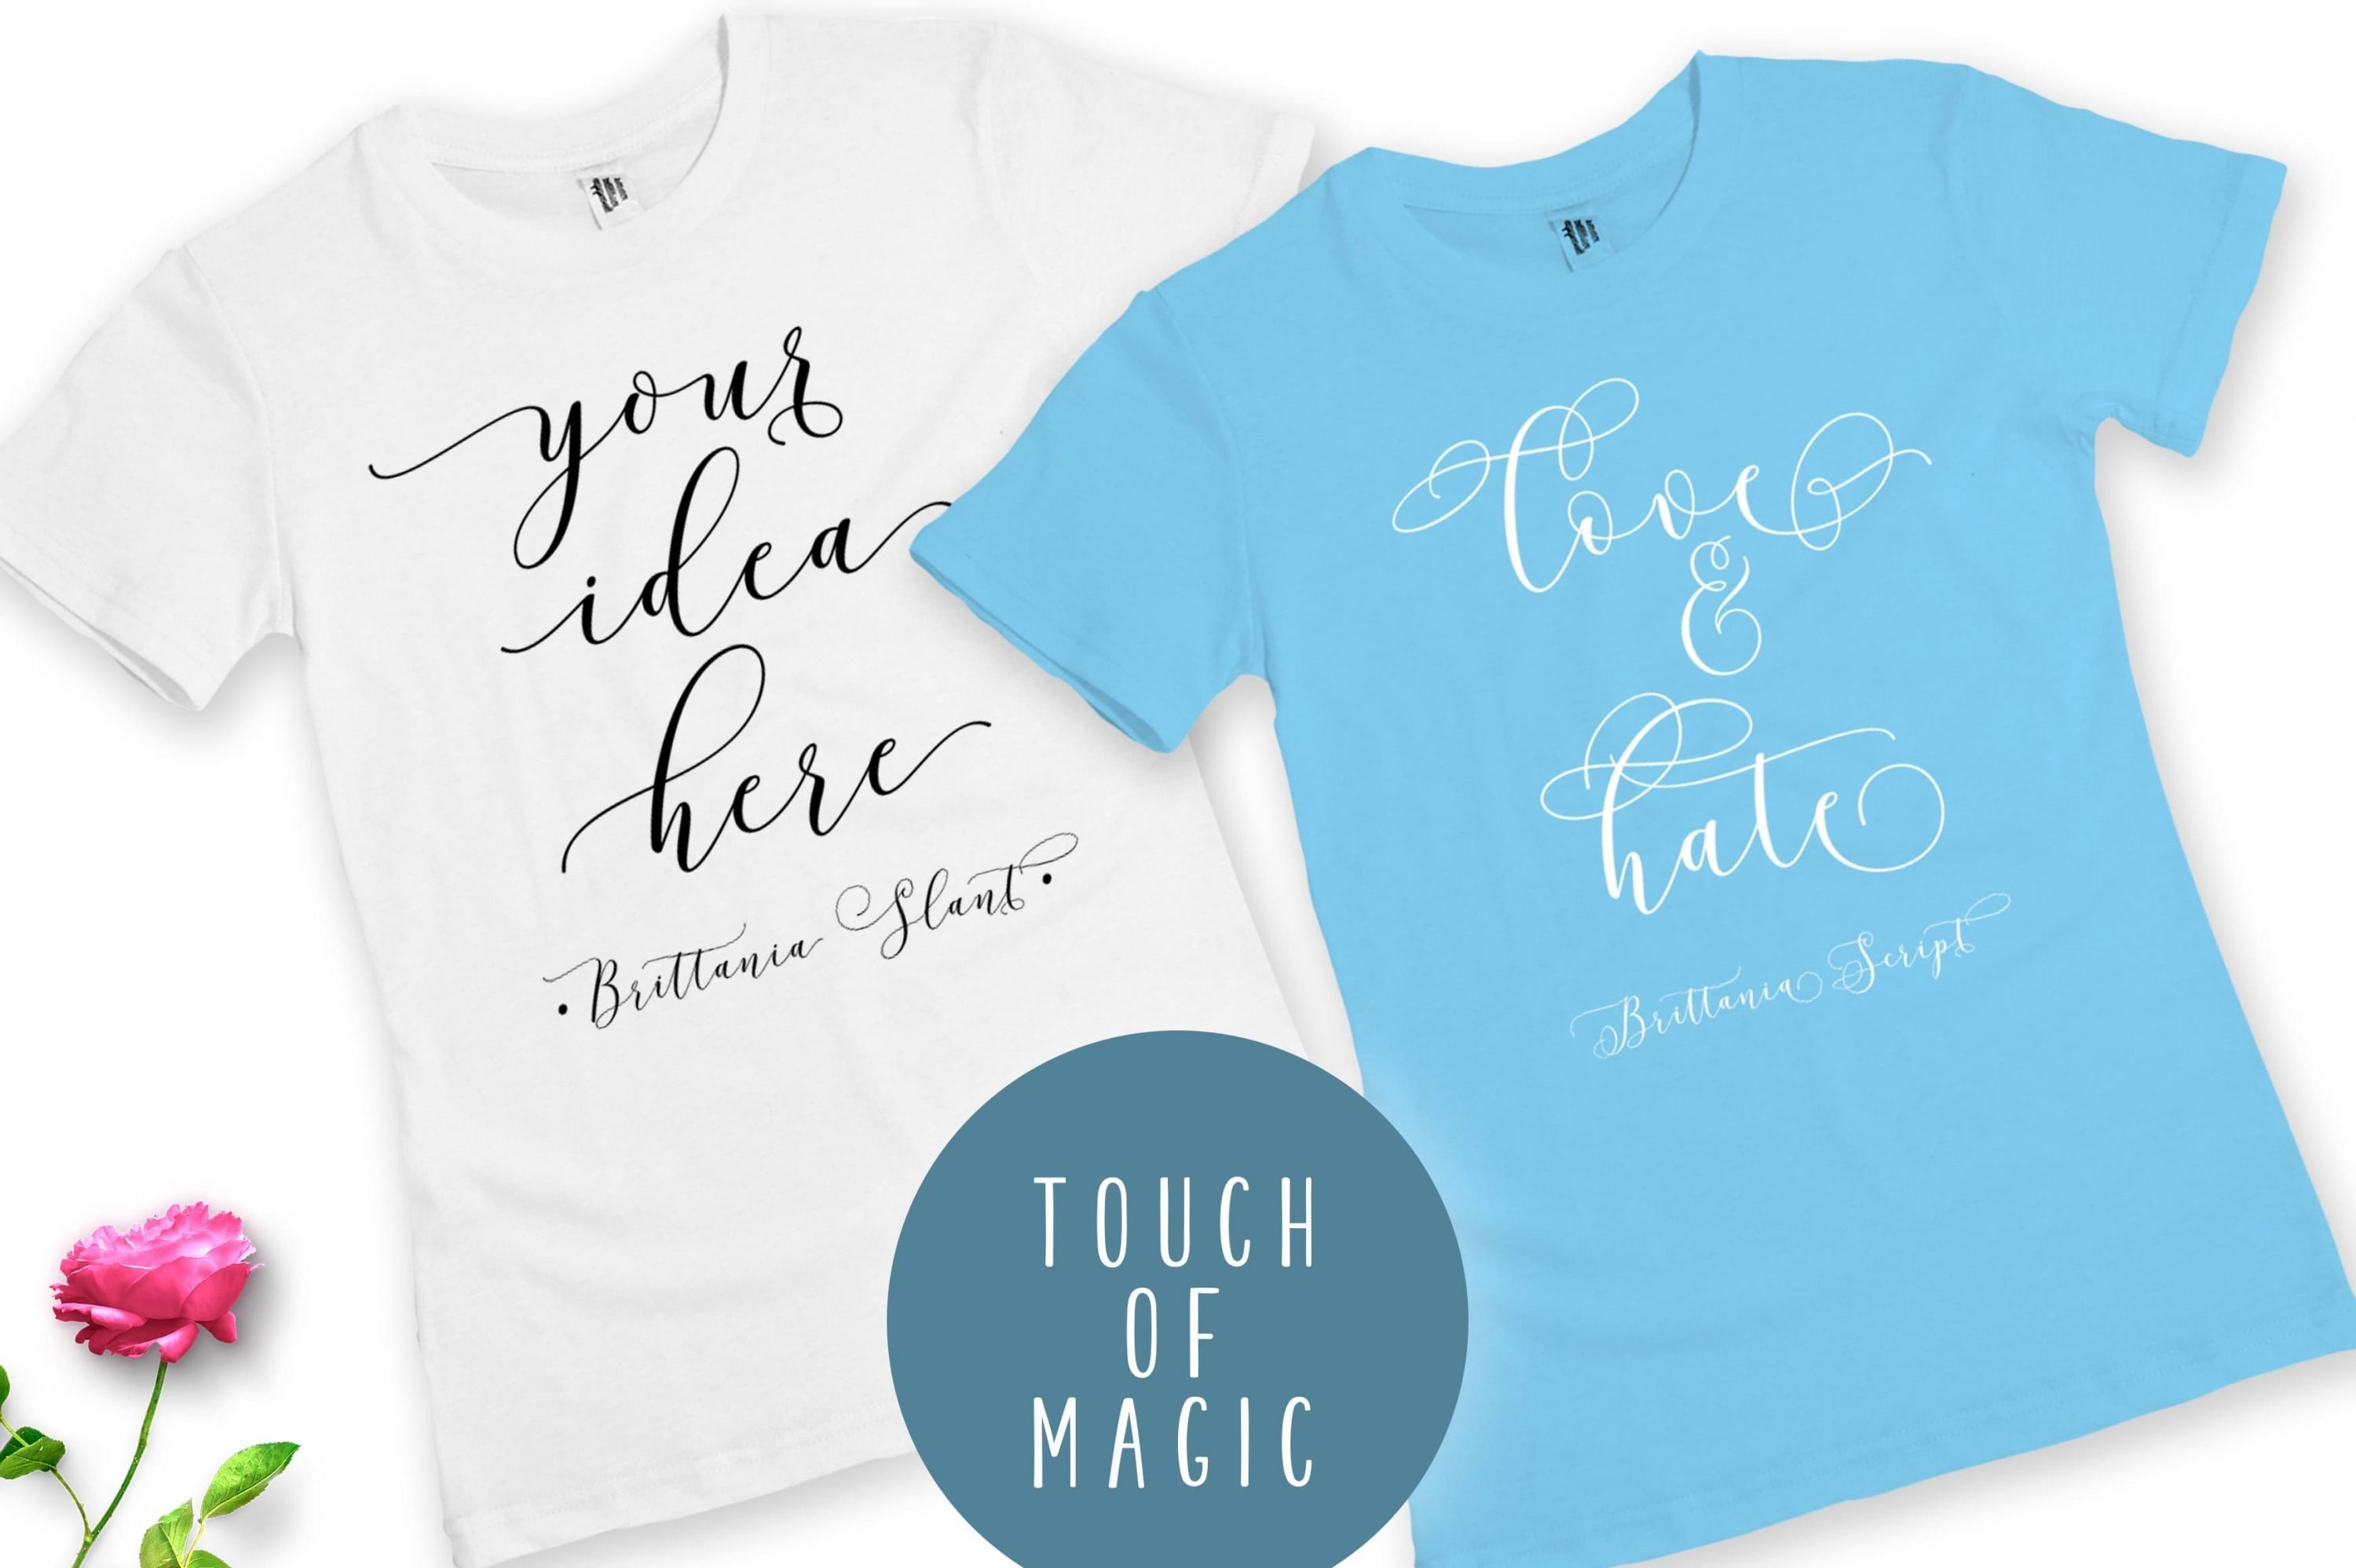 Two t-shirts with thin italic font.